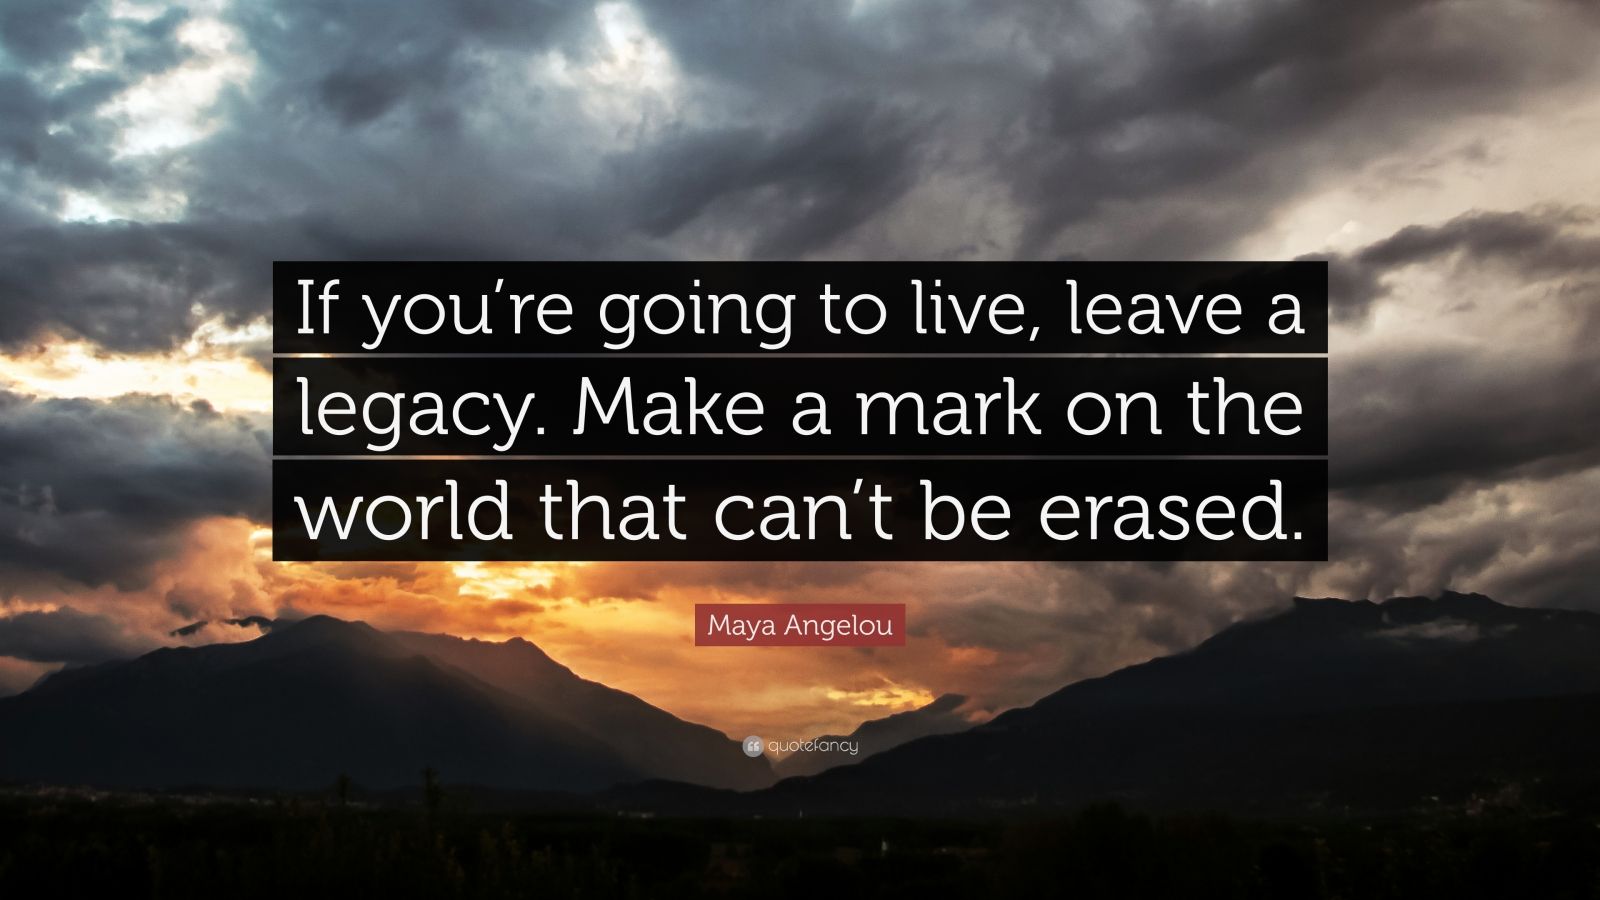 Maya Angelou Quote: “If you’re going to live, leave a legacy. Make a